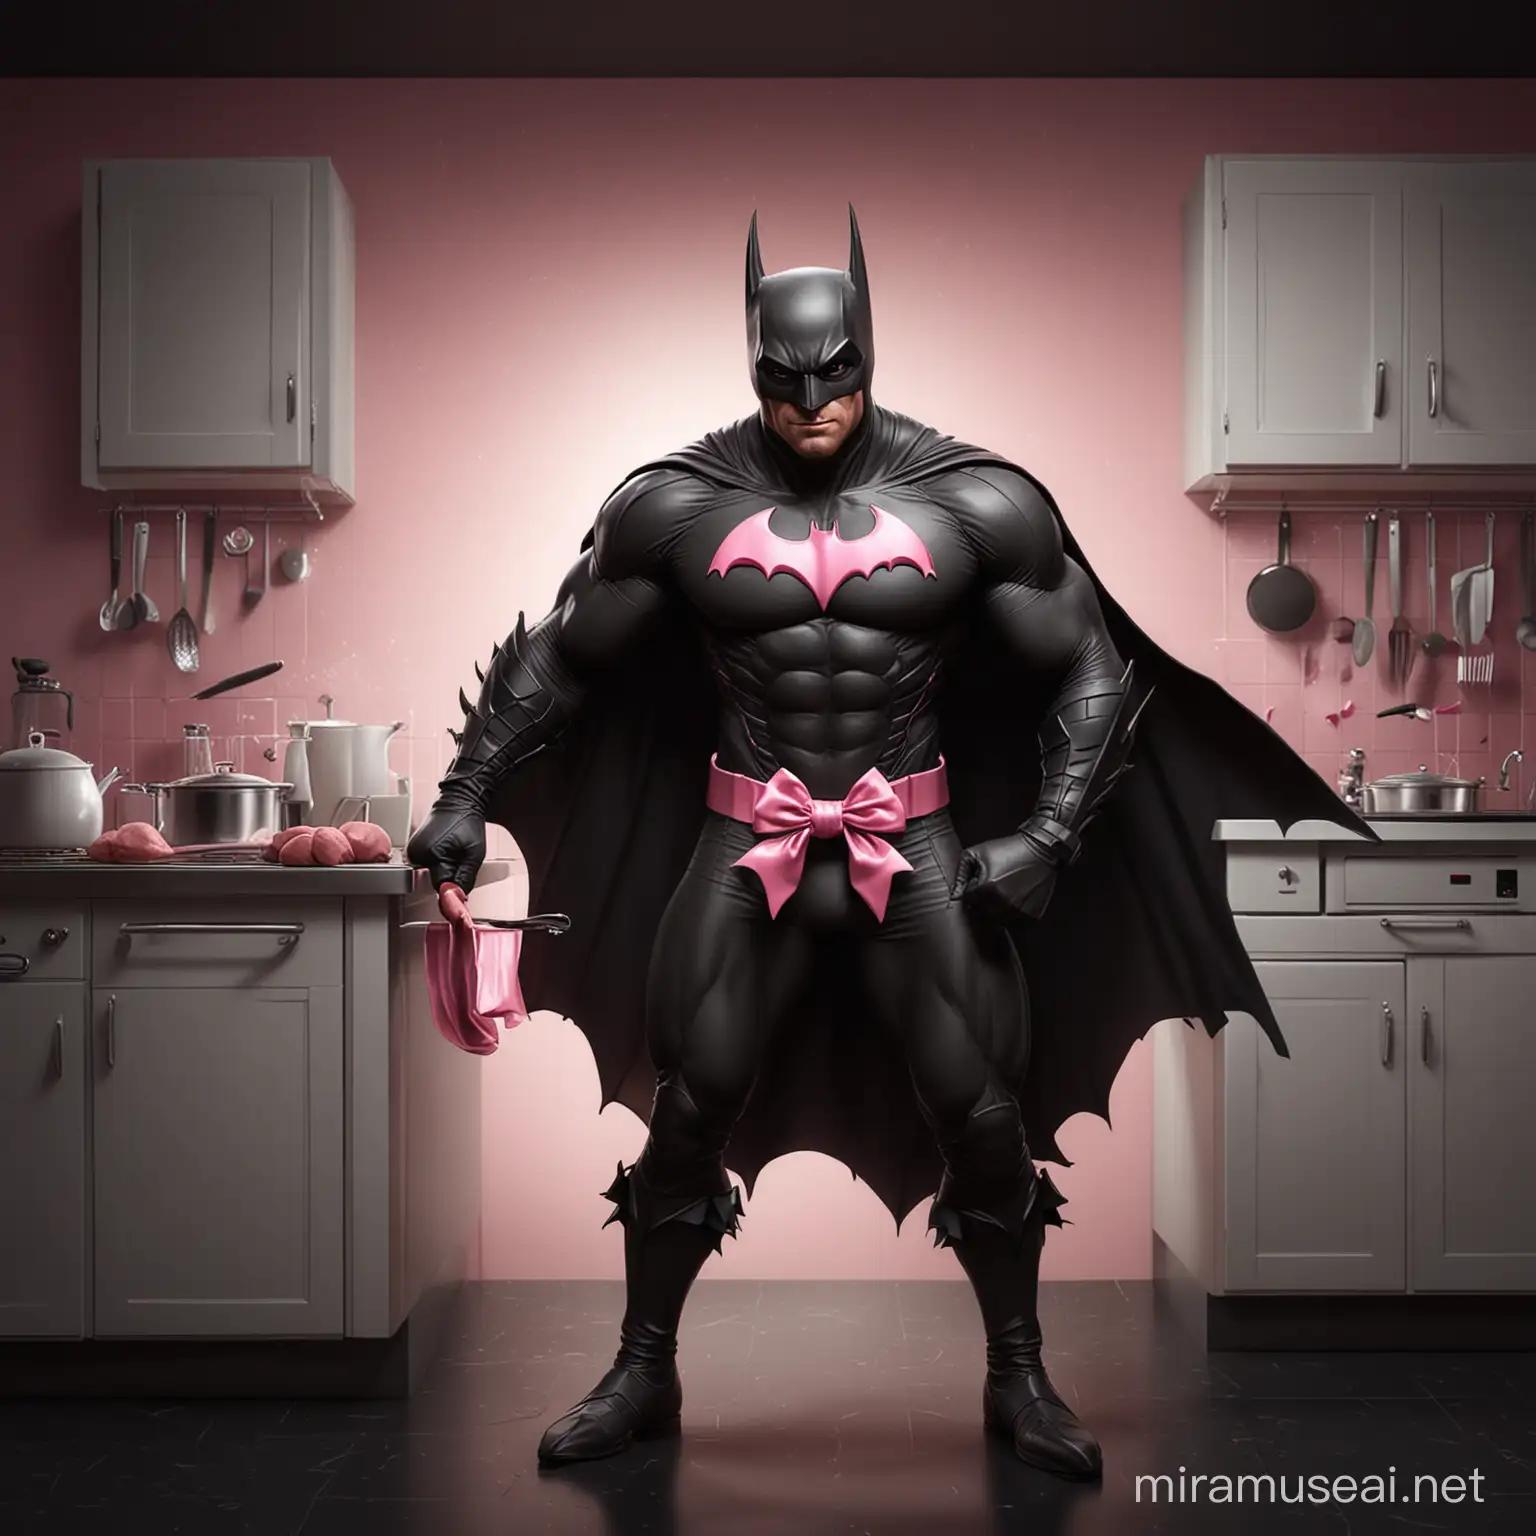 Fierce Bat Man Caricature Cooking in Coquette Style with Pink Bow